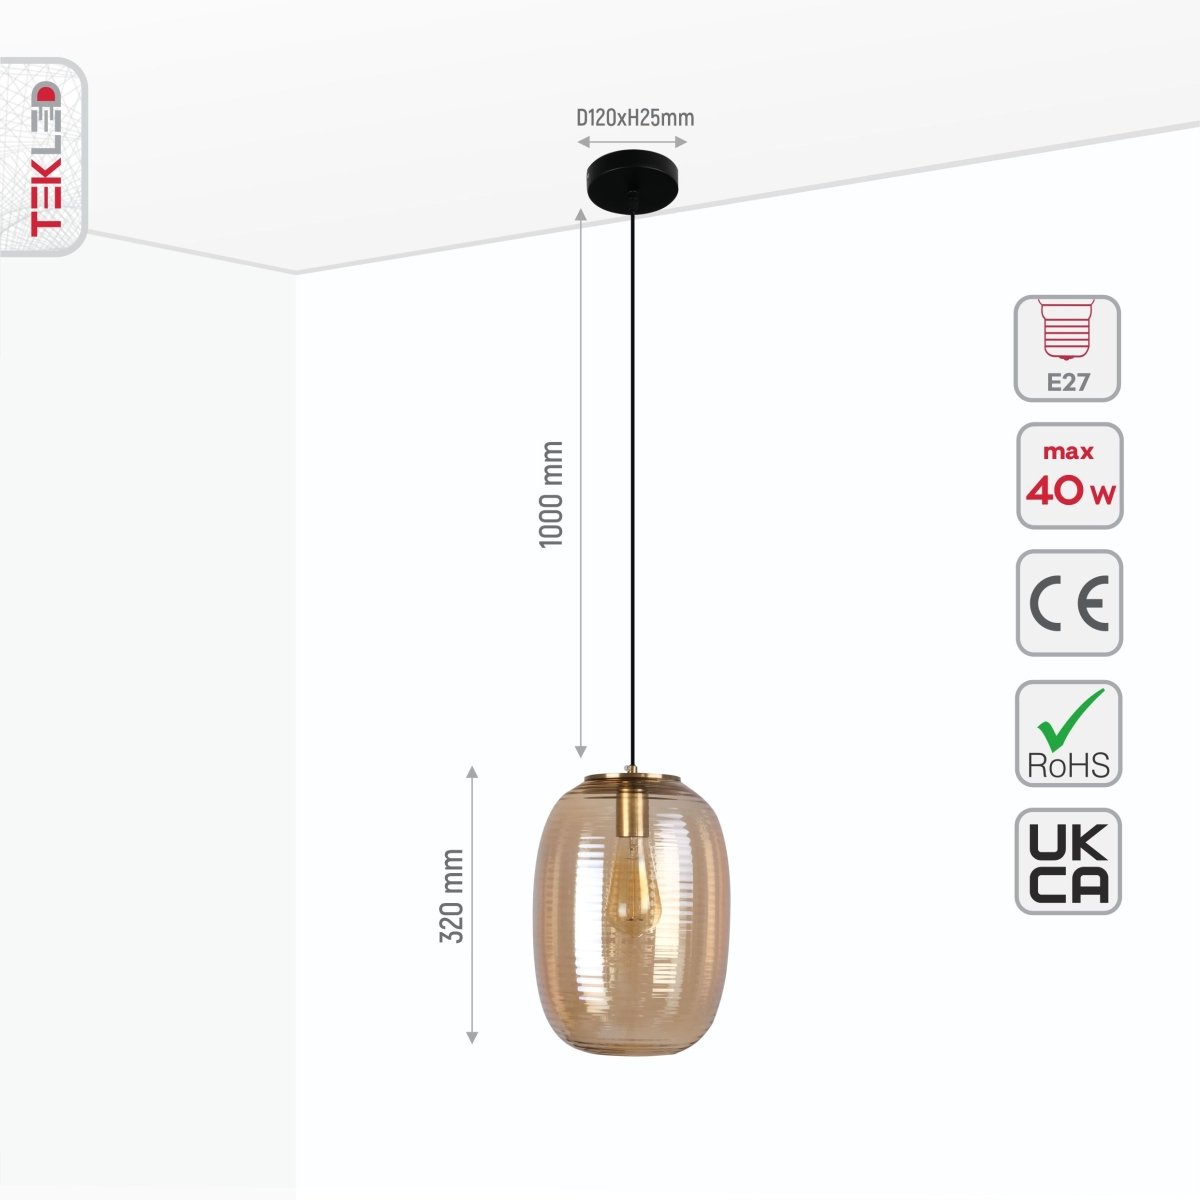 Size and specs of Bee Hive Amber Glass Pendant Light with E27 Fitting | TEKLED 159-17344